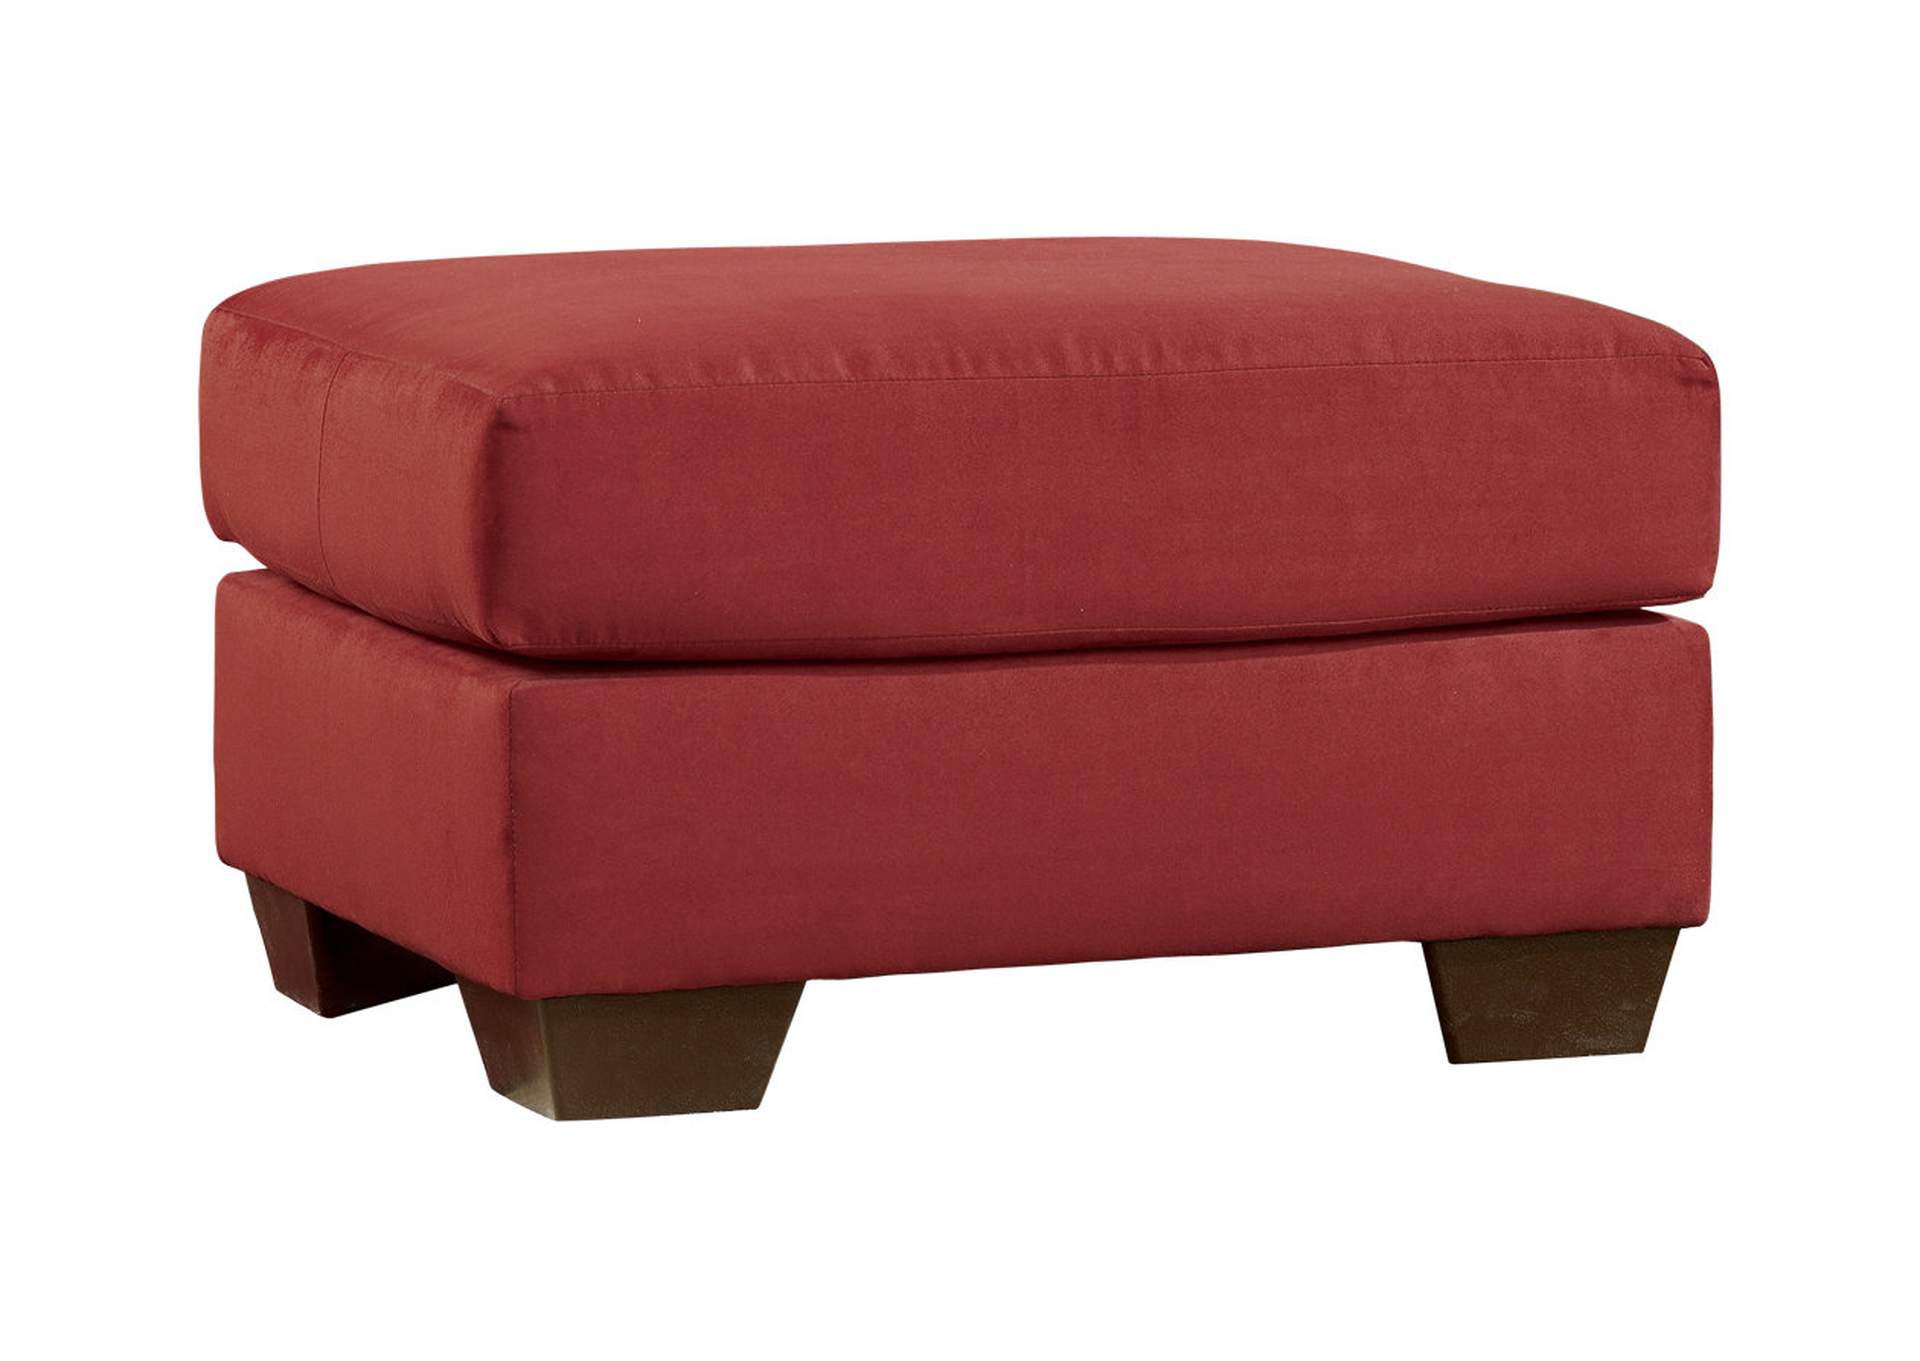 Darcy Sofa, Loveseat and Ottoman,Signature Design By Ashley